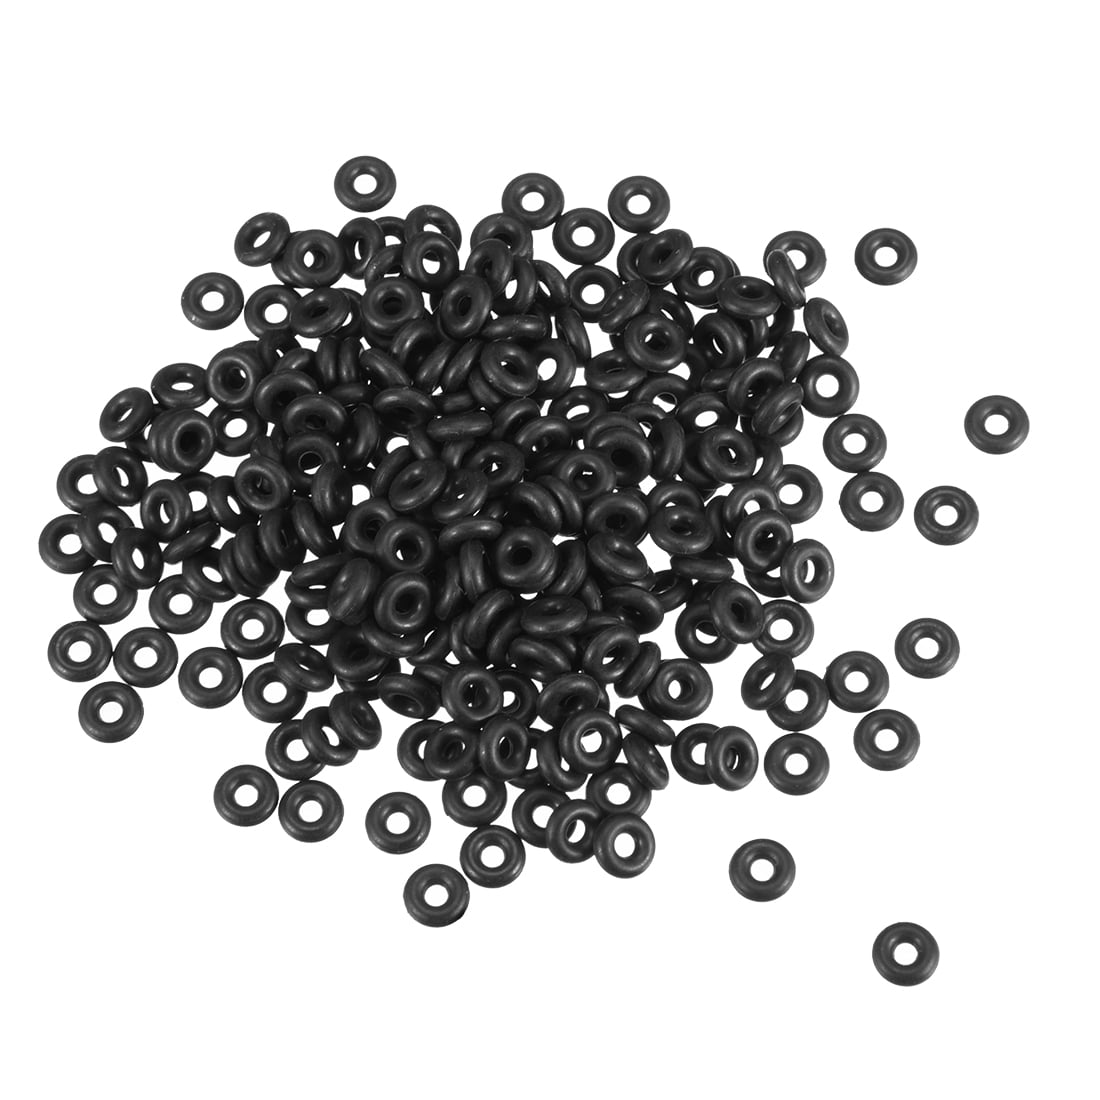 3mm Section 124mm Bore NITRILE 70 Rubber O-Rings 